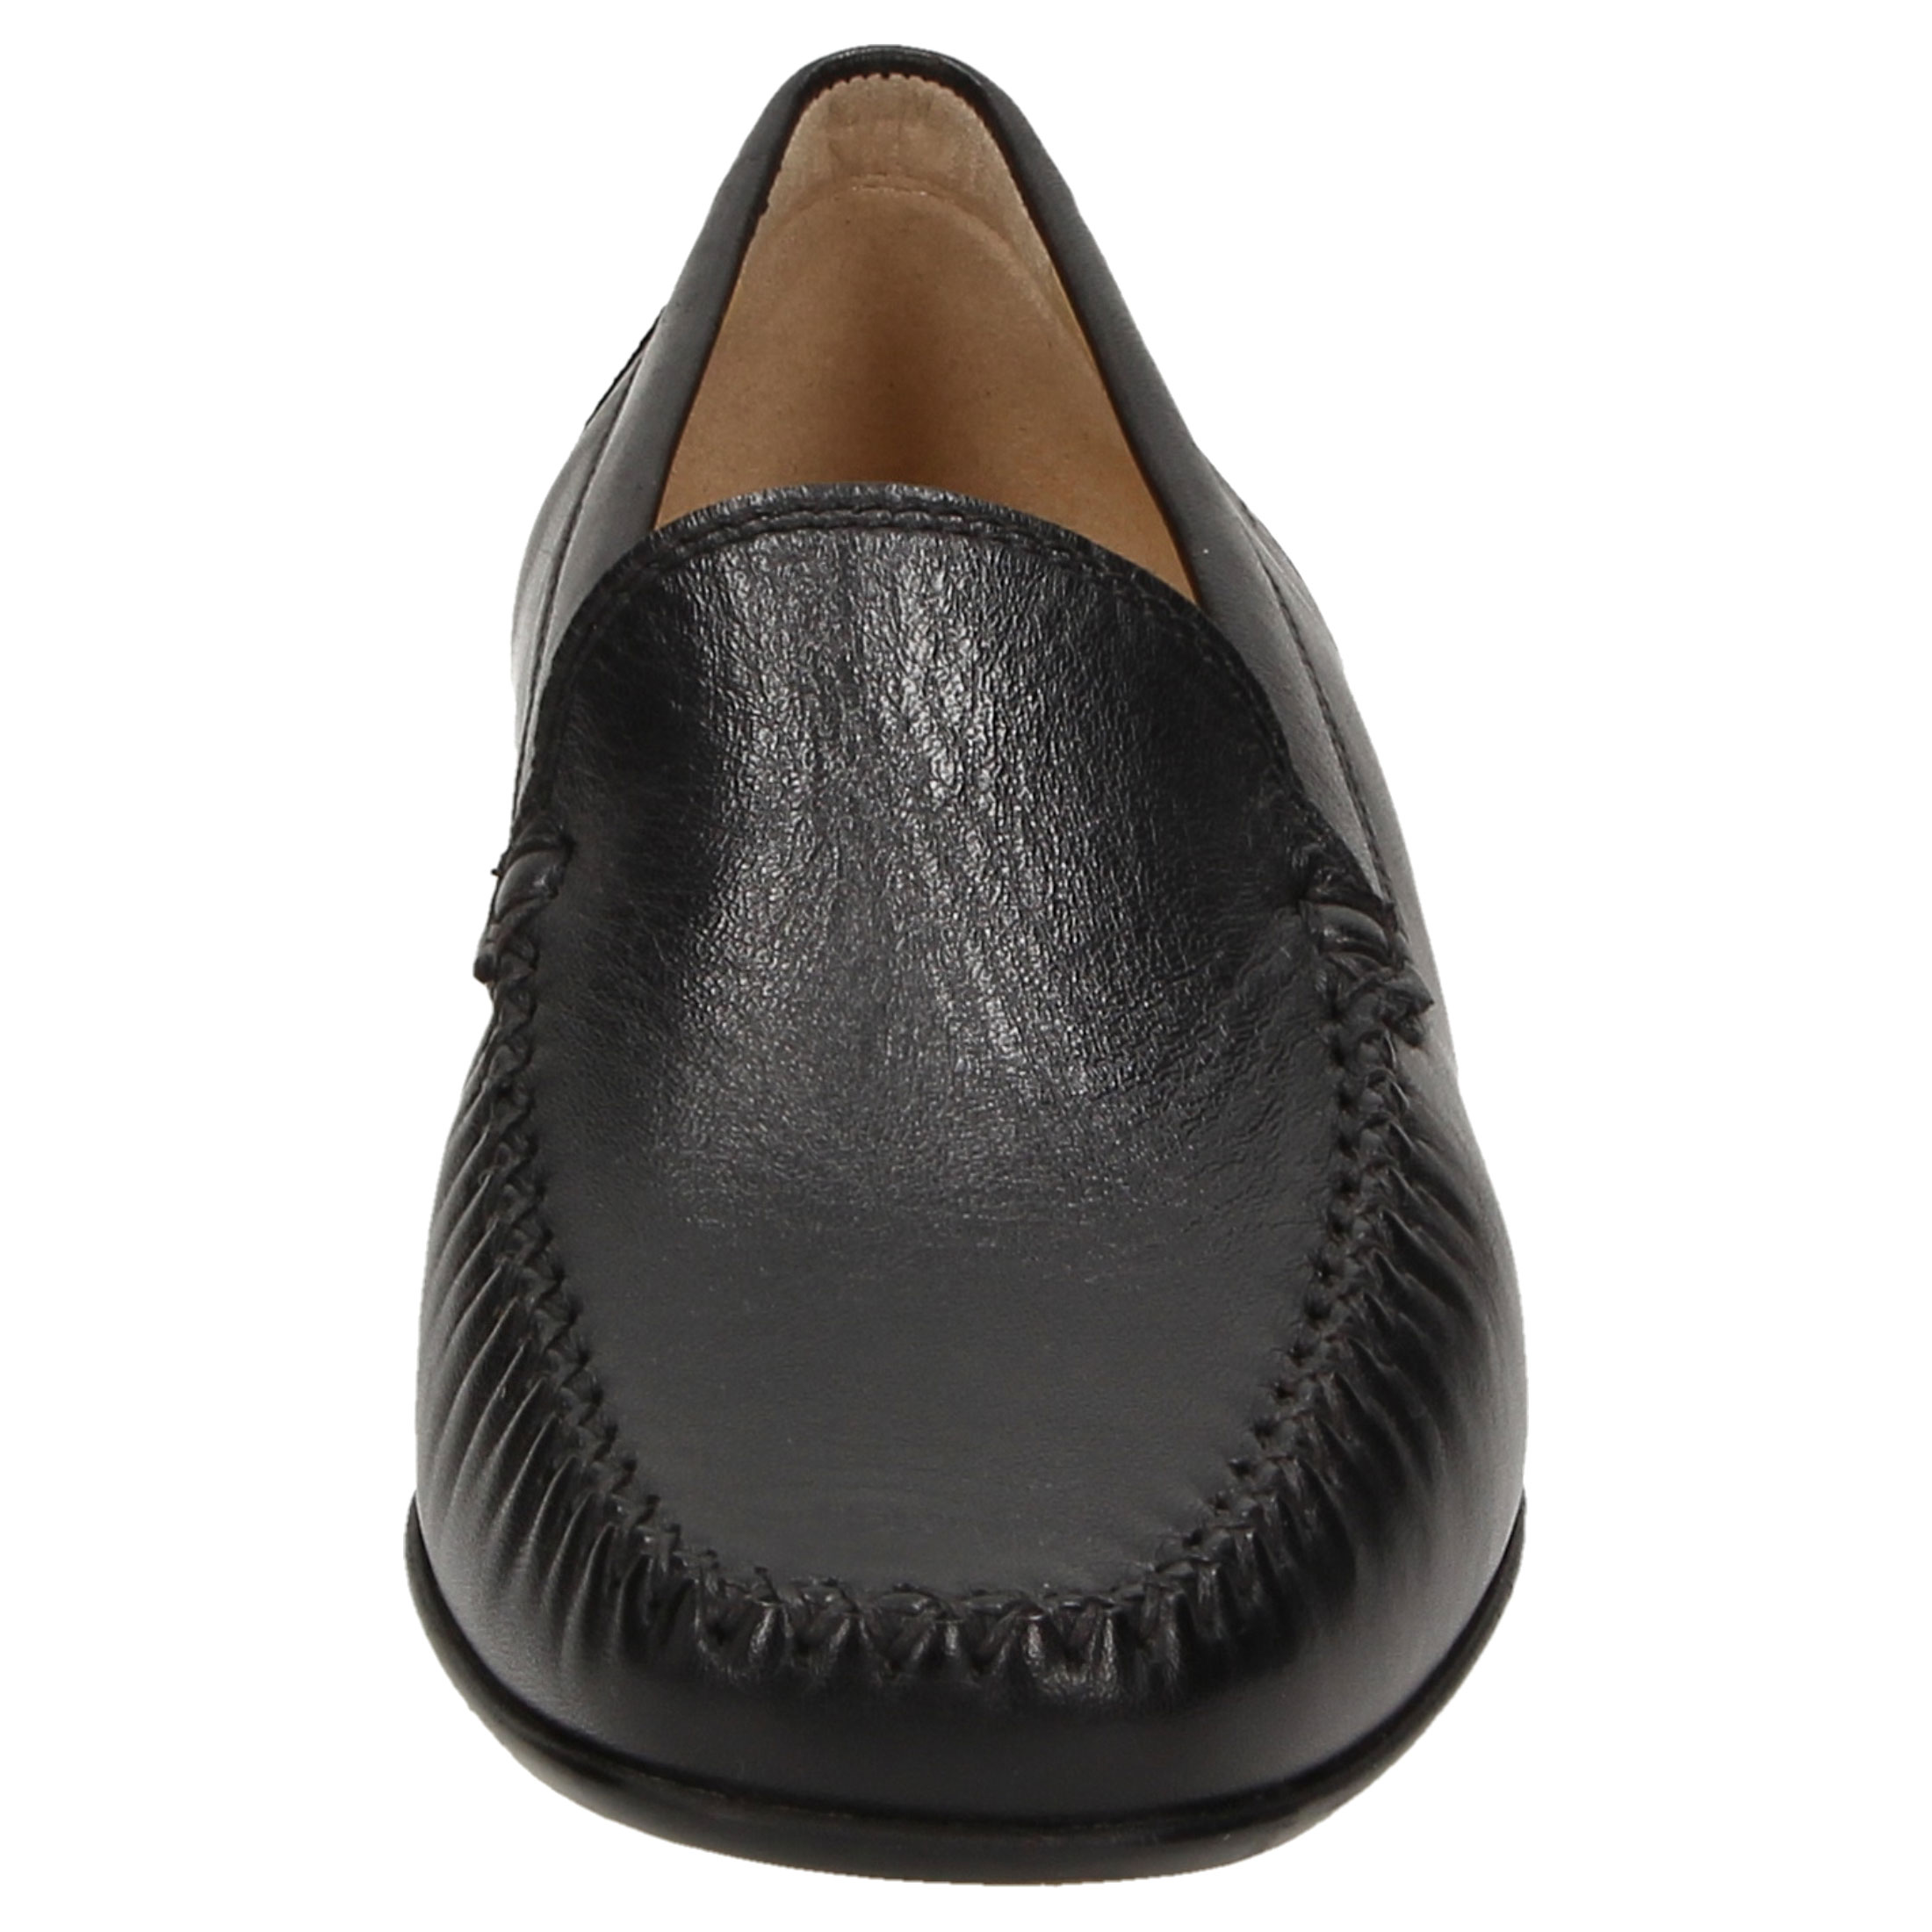 Sioux Campina - Black smooth leather